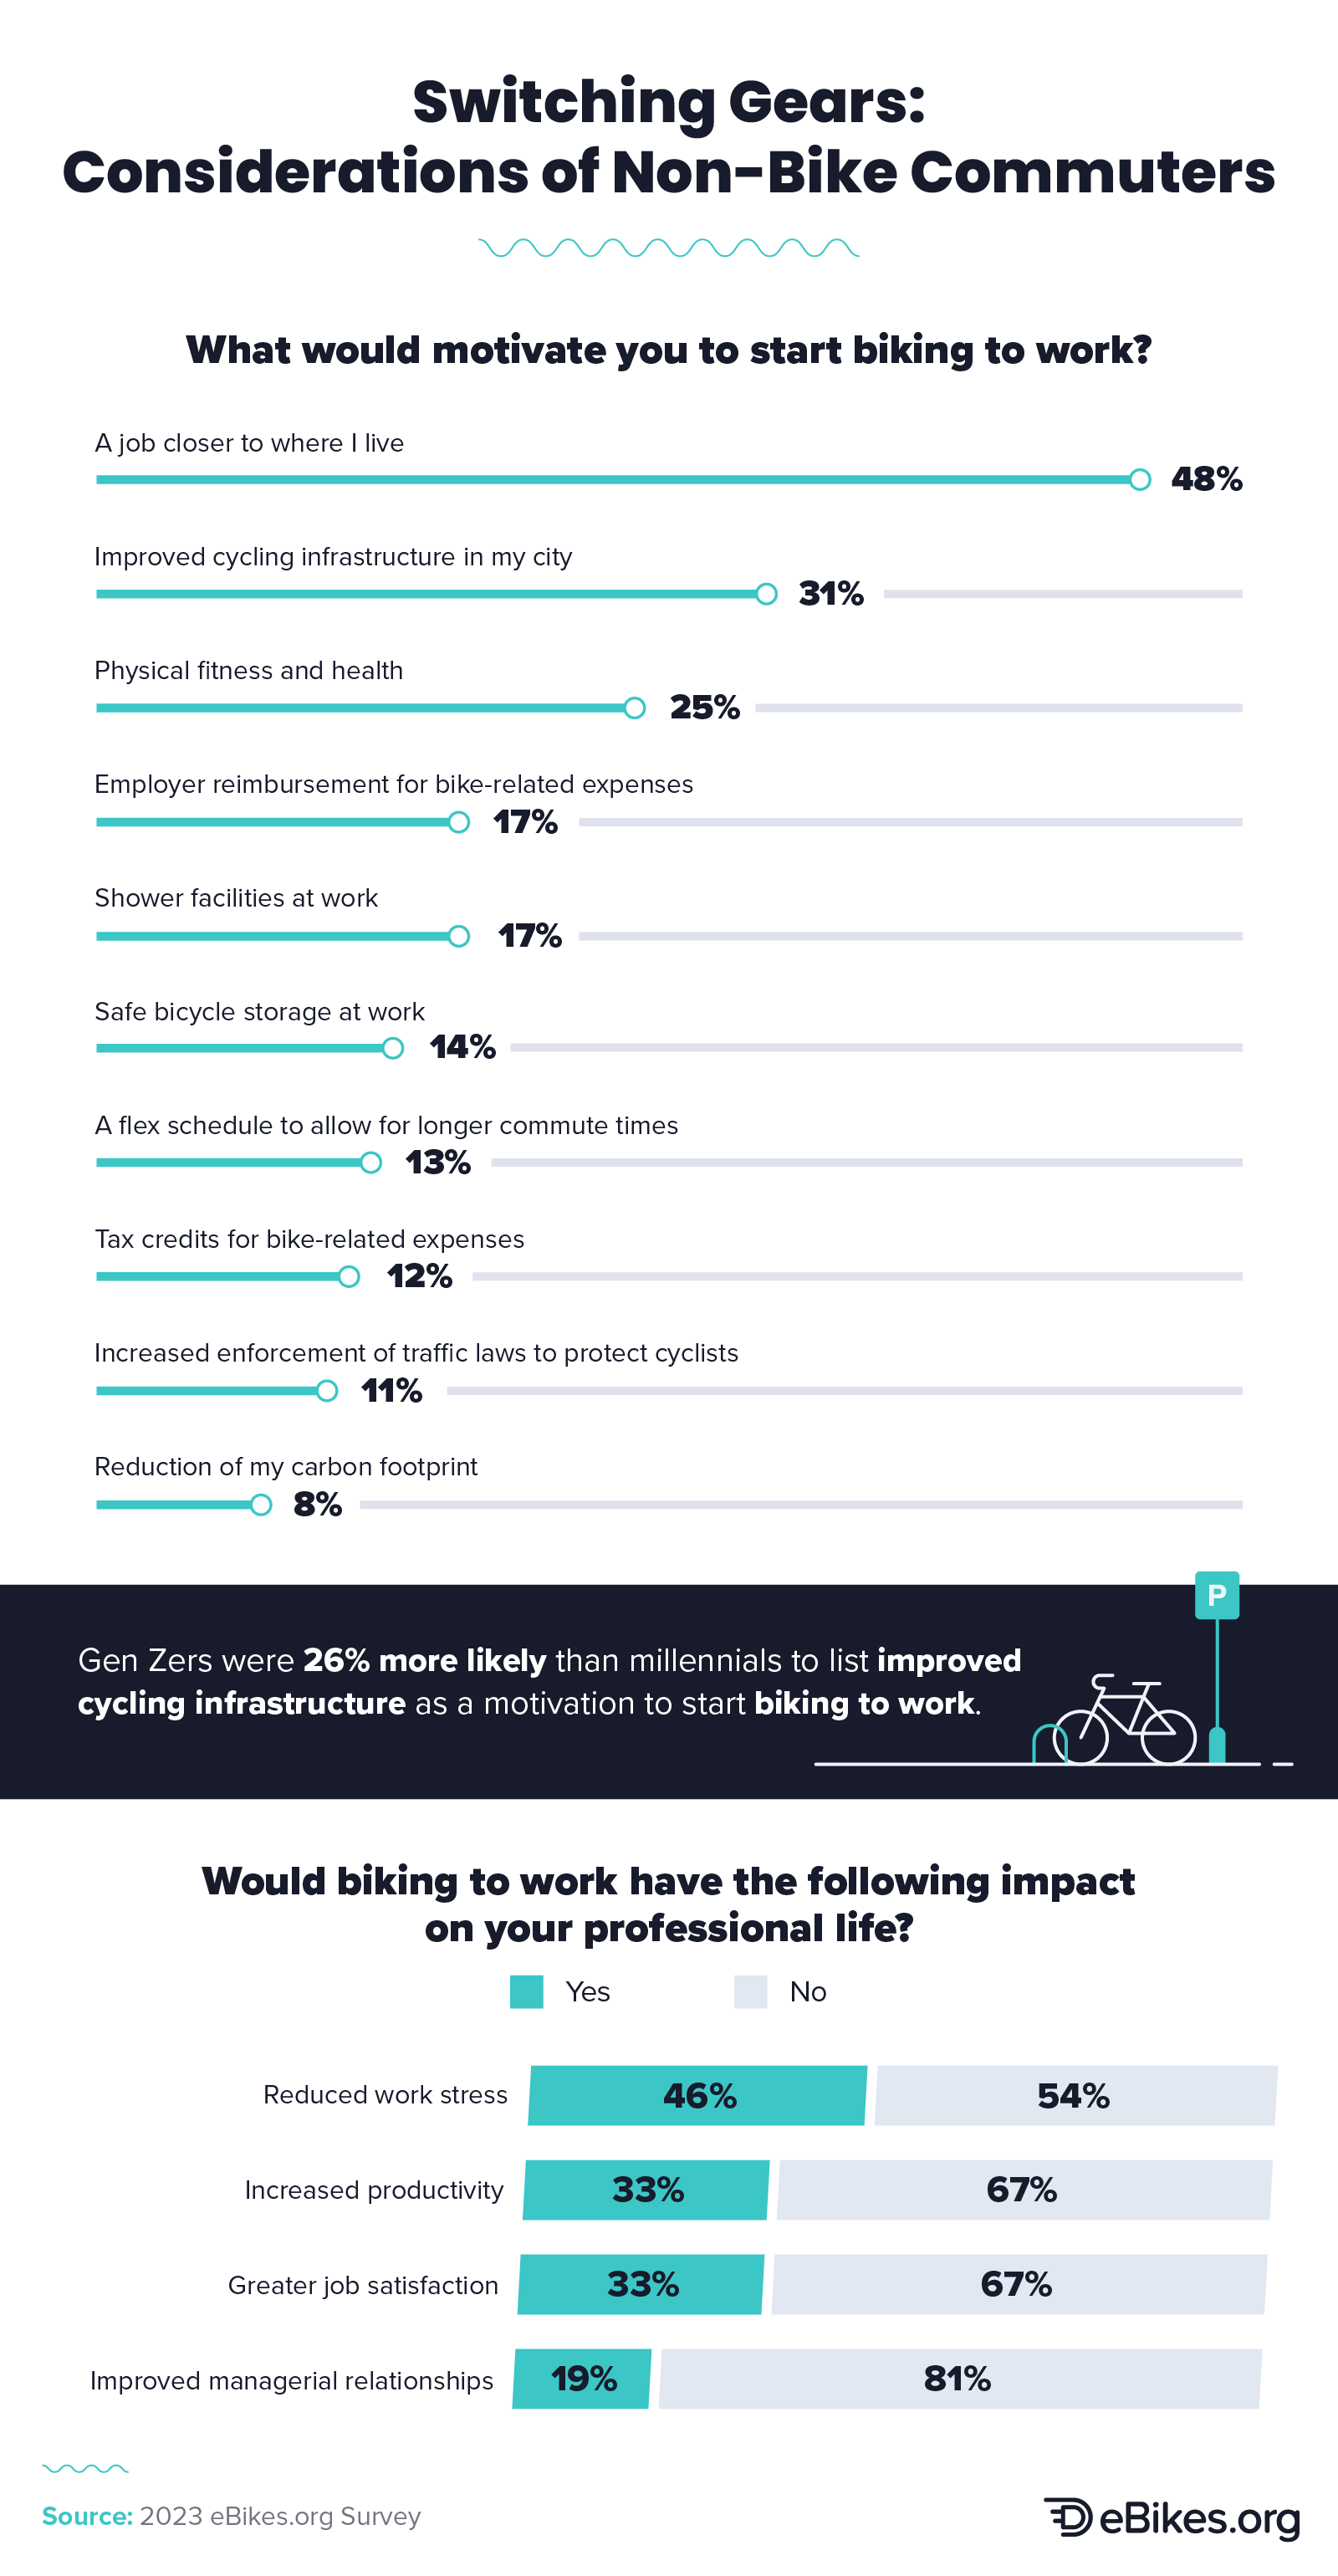 Infographic: Motivations for non-bike commuters to start biking to work and perceived professional impacts of biking.